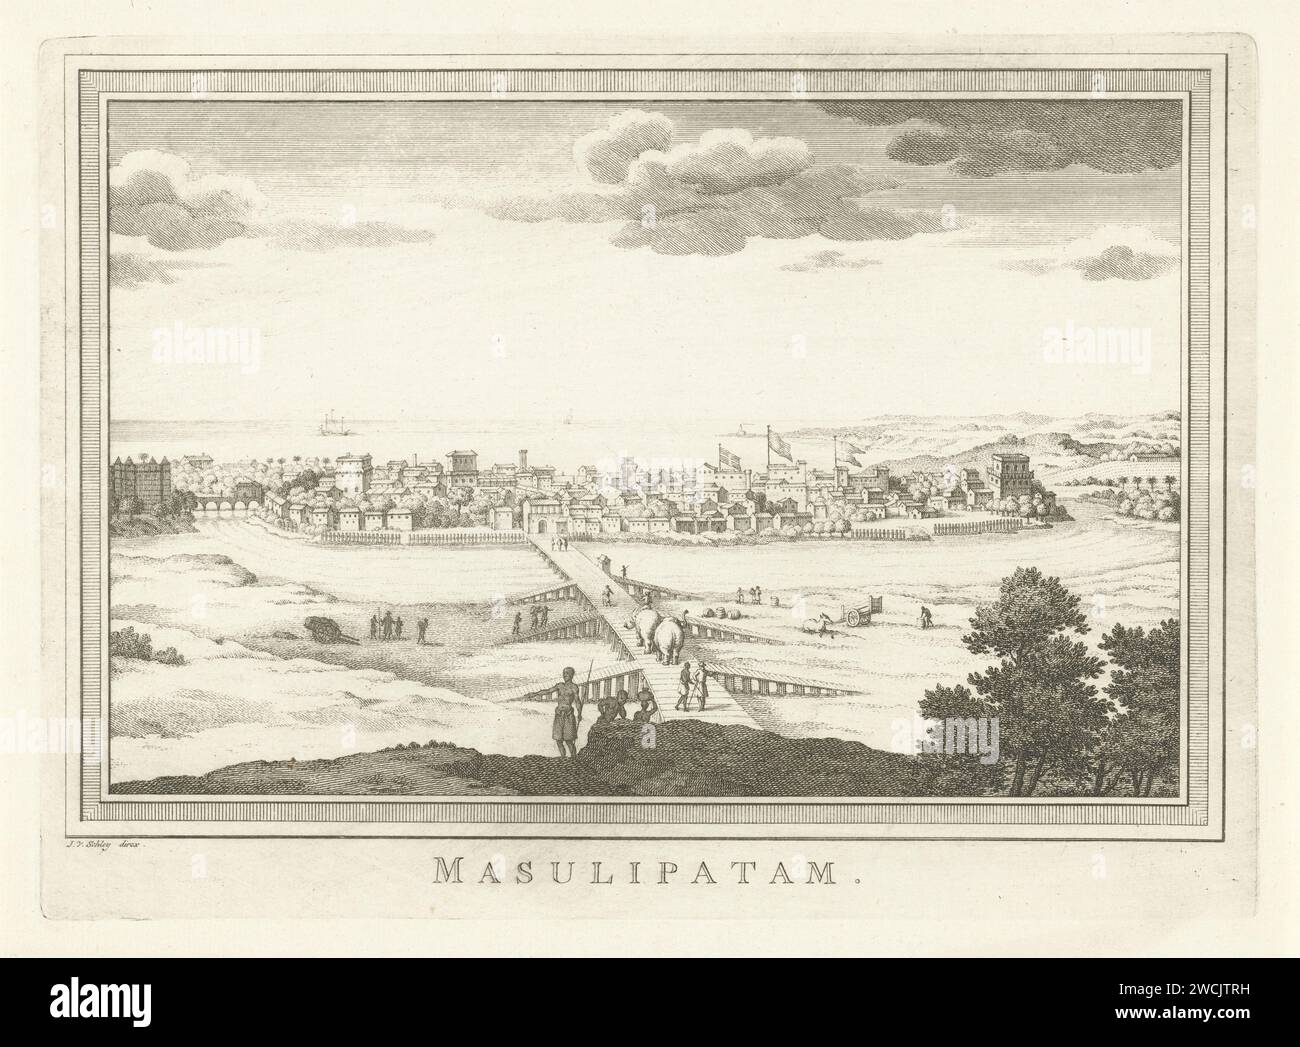 Goney to Machiliipatamnam (Masulipatatam), Jacob Van the Skley, 1725 - 1779 print View of the city of Machilipatnam (Masulipatnam) on the Koromandelkast in India. Two elephants run on one of the connecting bridges over the river to the city. In the background the sea with a few boats. Amsterdam paper etching / engraving  Masipatnam Stock Photo